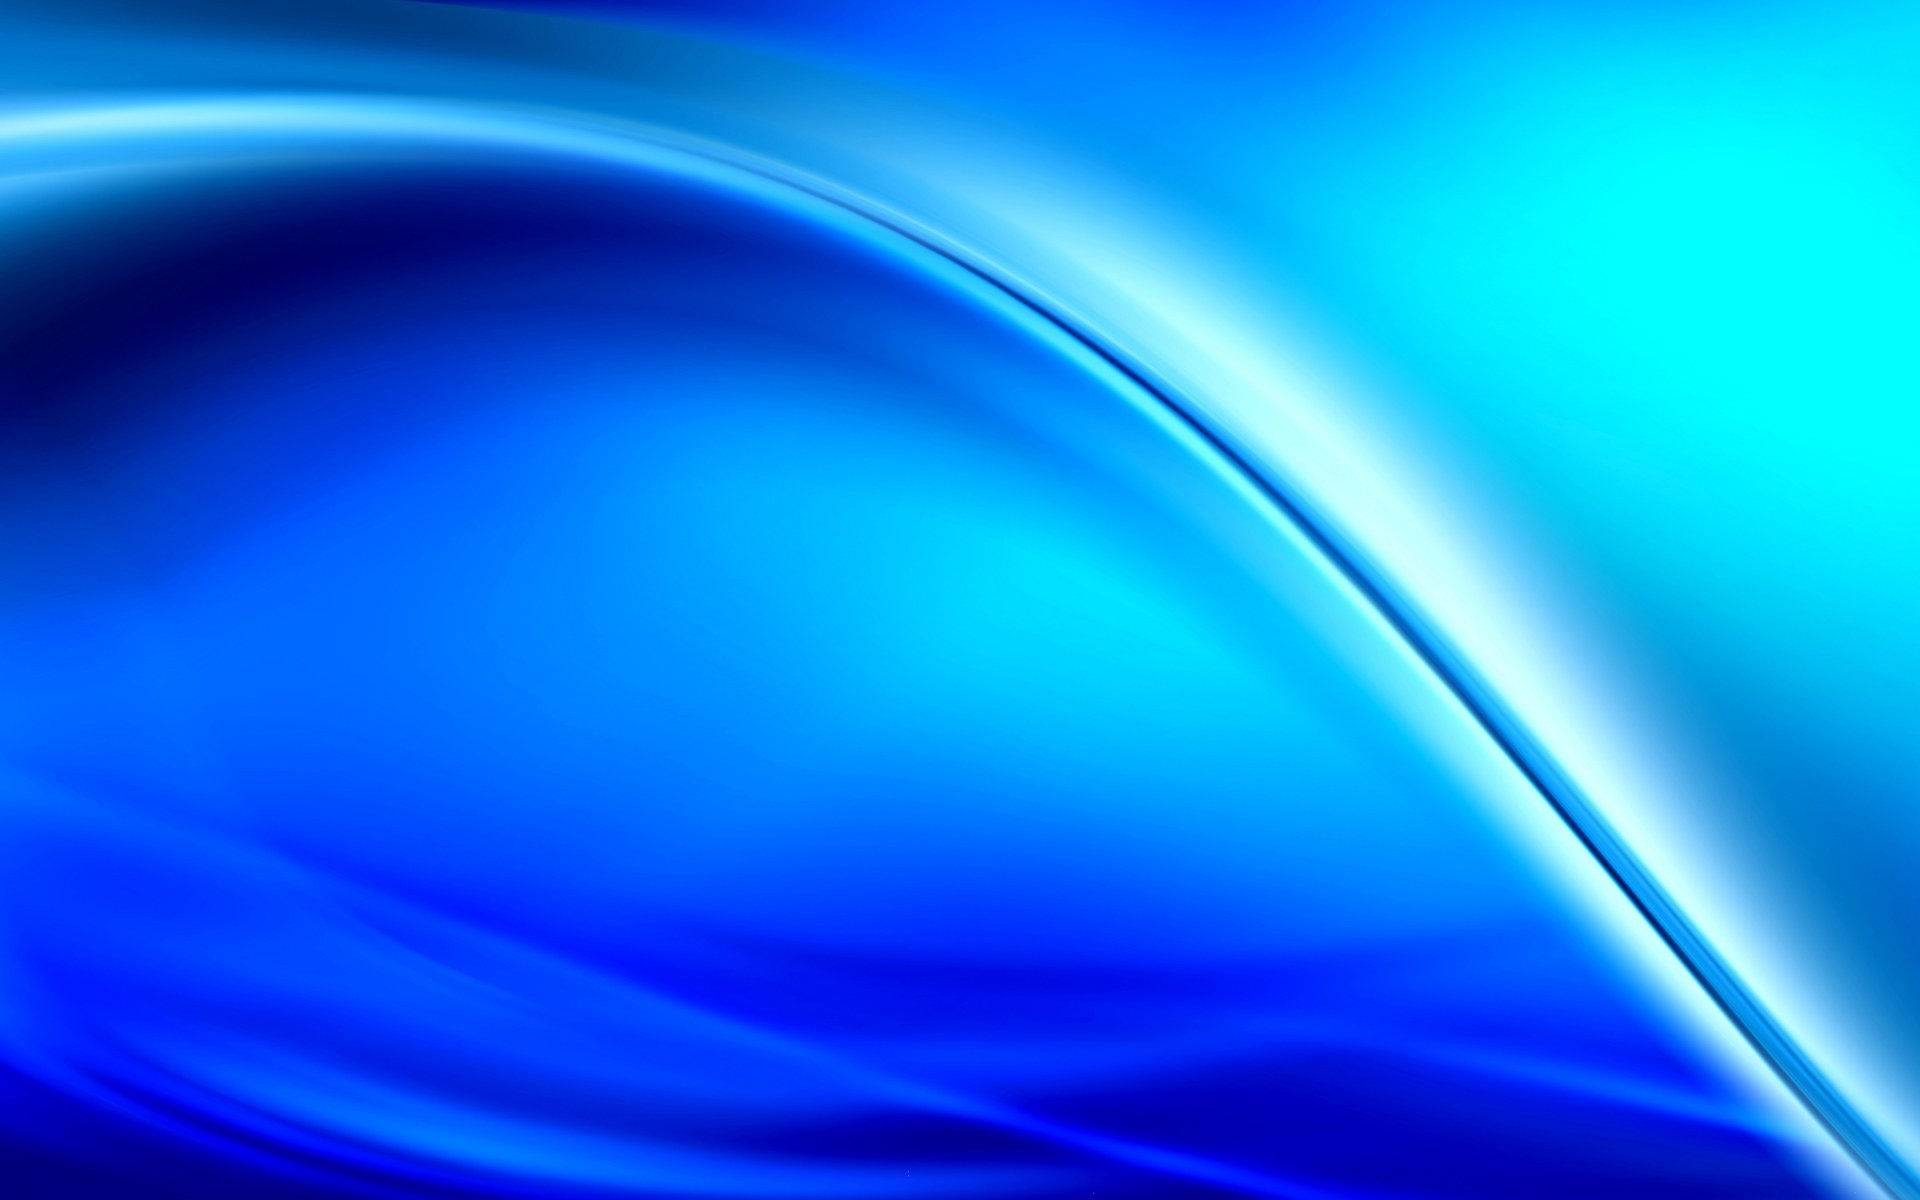 Abstract Blue 2126 Hd Wallpapers in Abstract – Imagesci.com